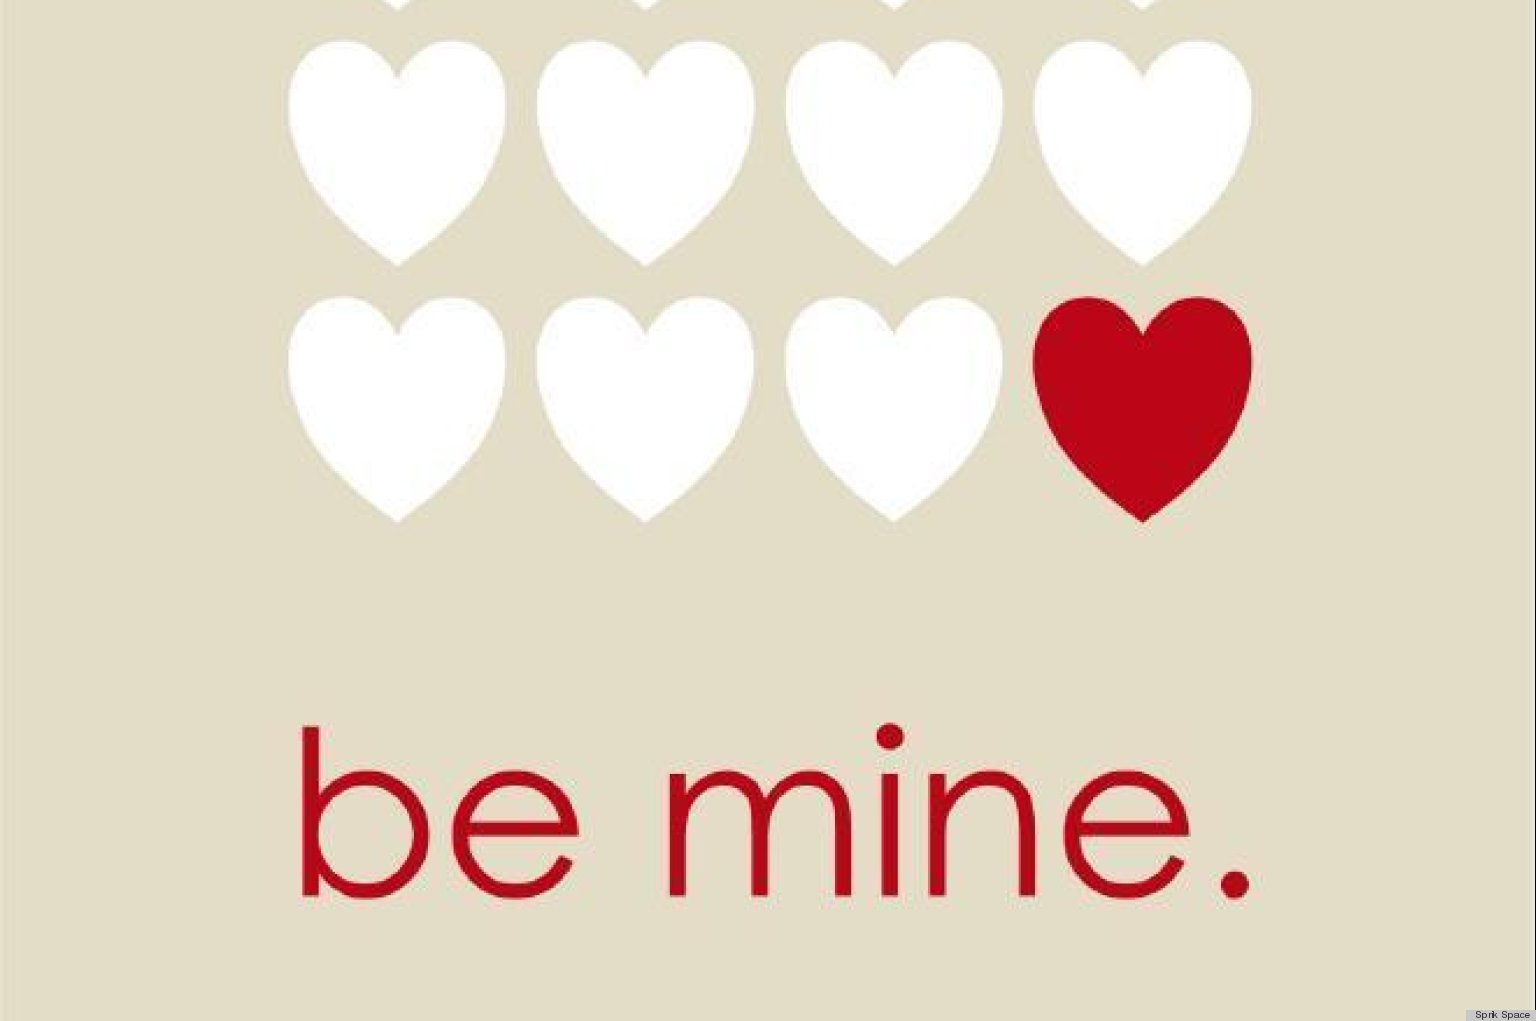 10 Free Valentine's Day Printable Decorations That'll Make Your Home Even Lovelier ...1536 x 1021